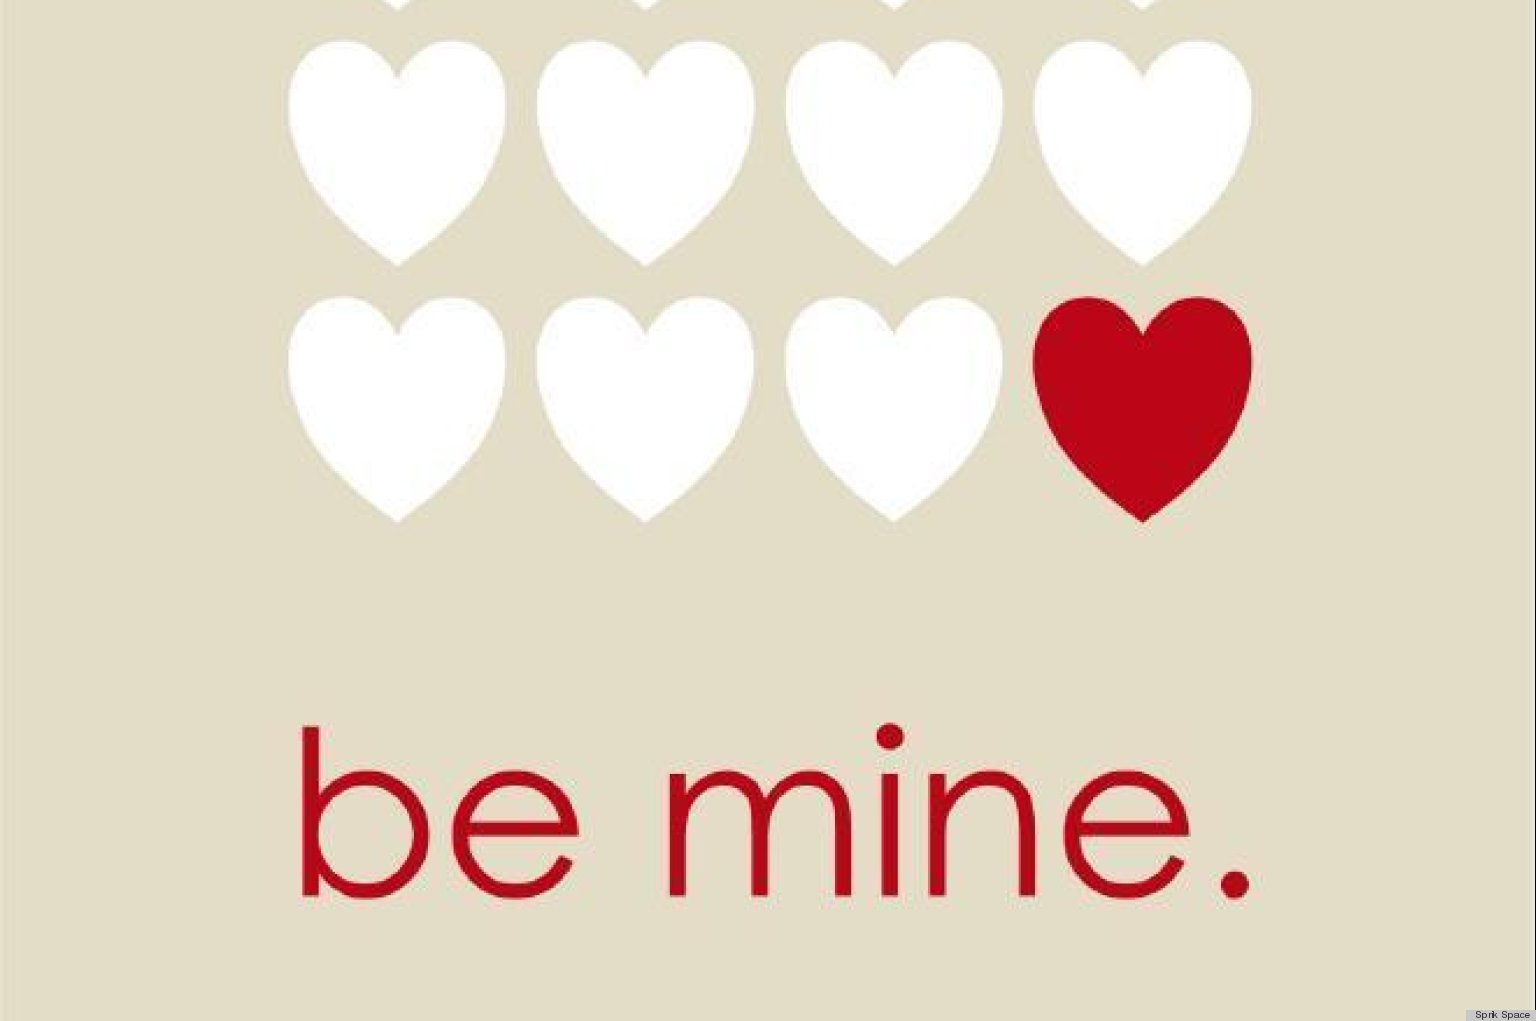 10 Free Valentine's Day Printable Decorations That'll Make Your Home Even Lovelier ...1536 x 1021